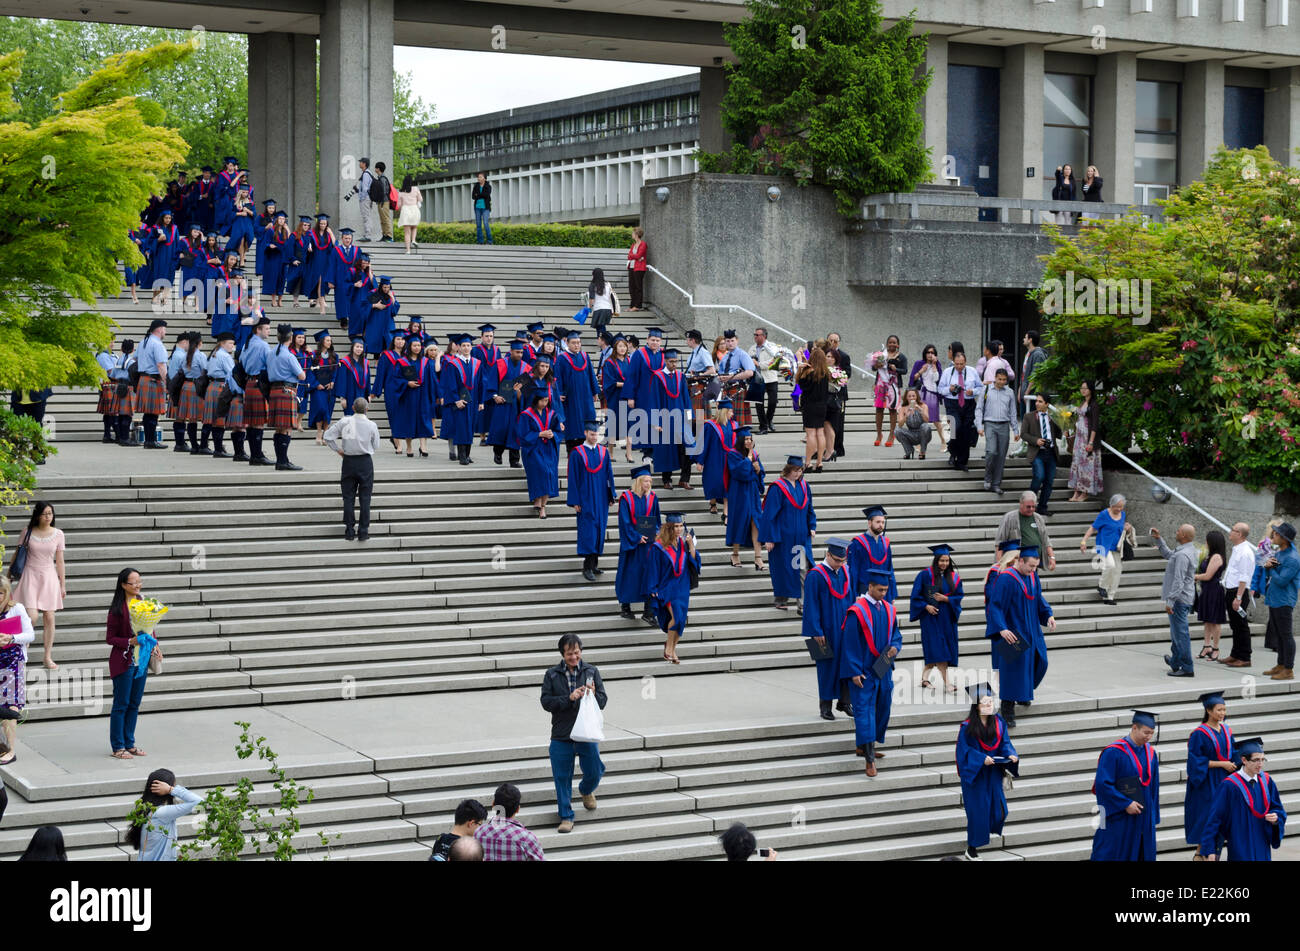 BURNABY, BC, CANADA.  JUNE 12, 2014:  Simon Fraser University graduands walk down the steps from the Academic Quadrangle towards the Convocation Mall.  The procession was part of the Spring 2014 convocation ceremony for the Faculty of Arts and Social Sciences. Stock Photo